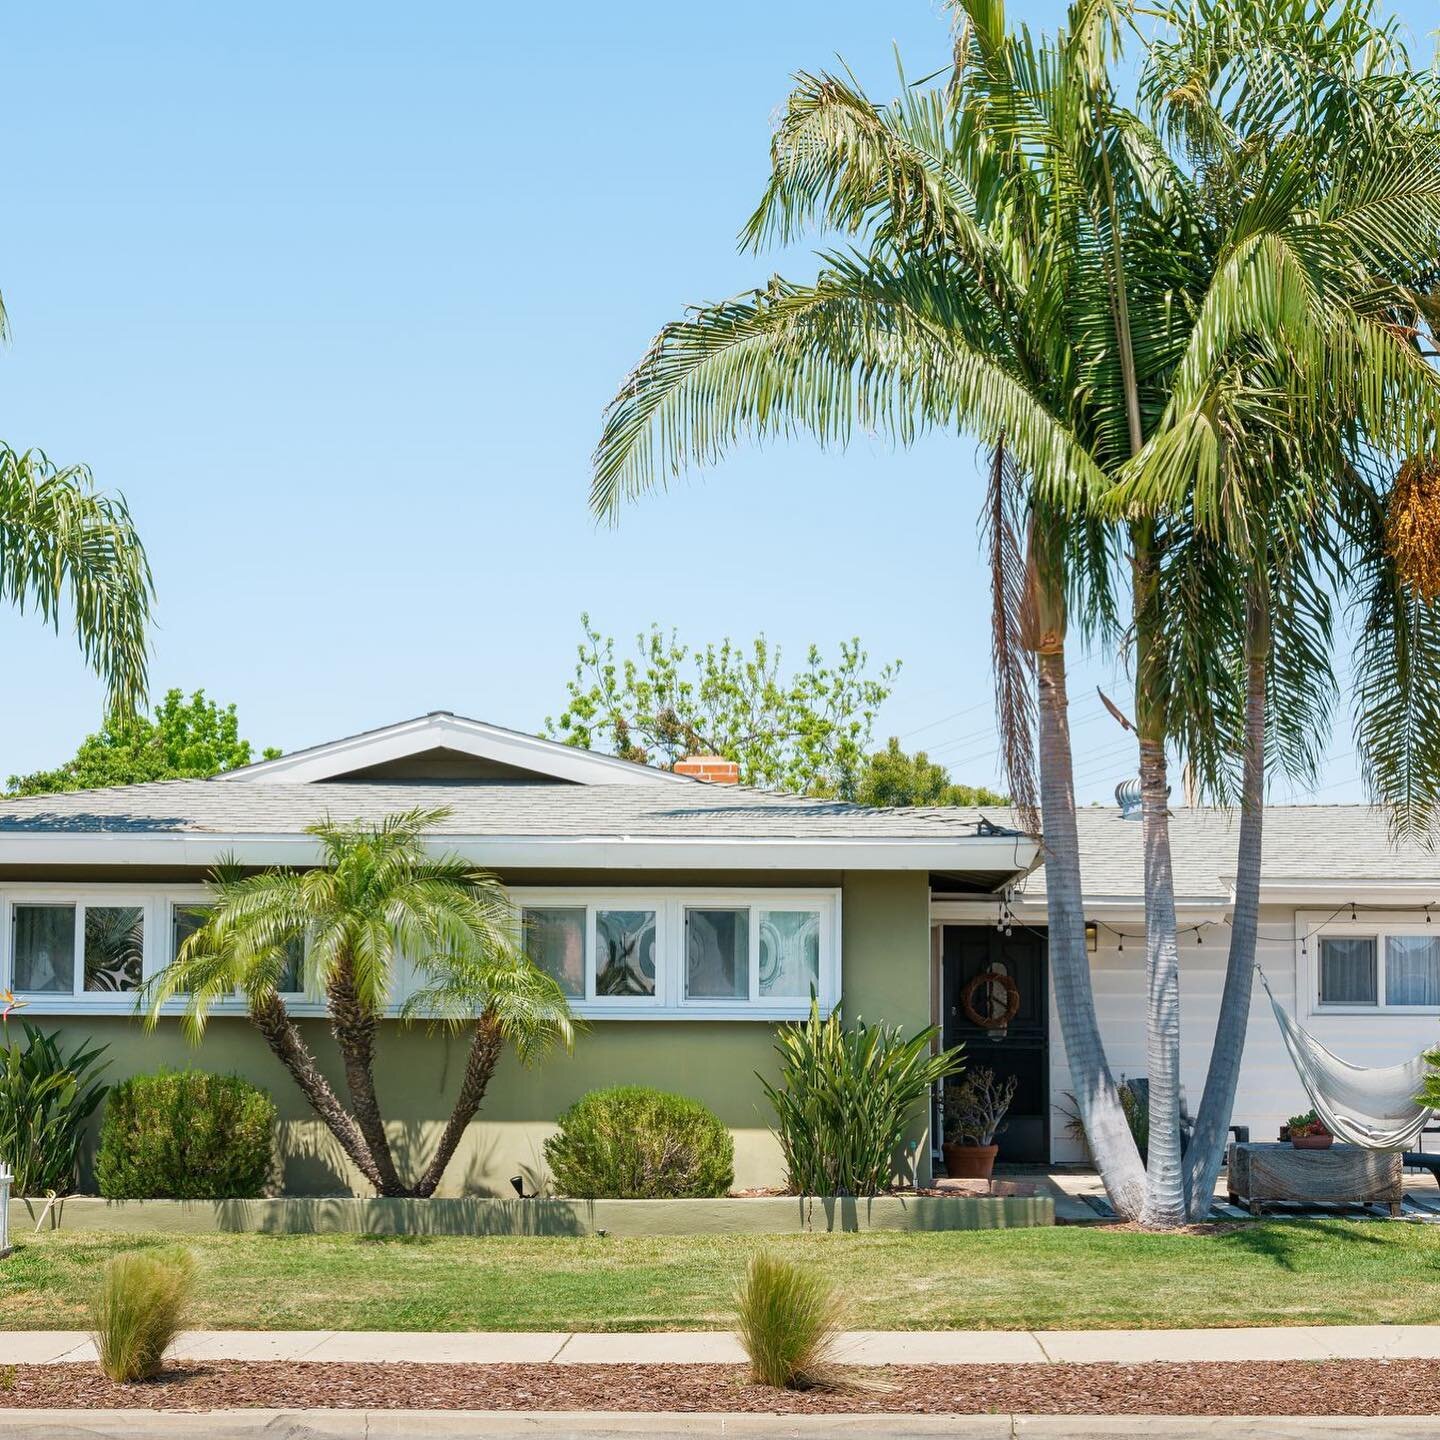 JUST SOLD📍Clairemont

This one didn&rsquo;t last long! With 100 people in + out of the open houses - followed by multiple offers - we are now closed. I sold this home to my clients in 2019 and happy to work alongside them again in the sale. 

5488 V